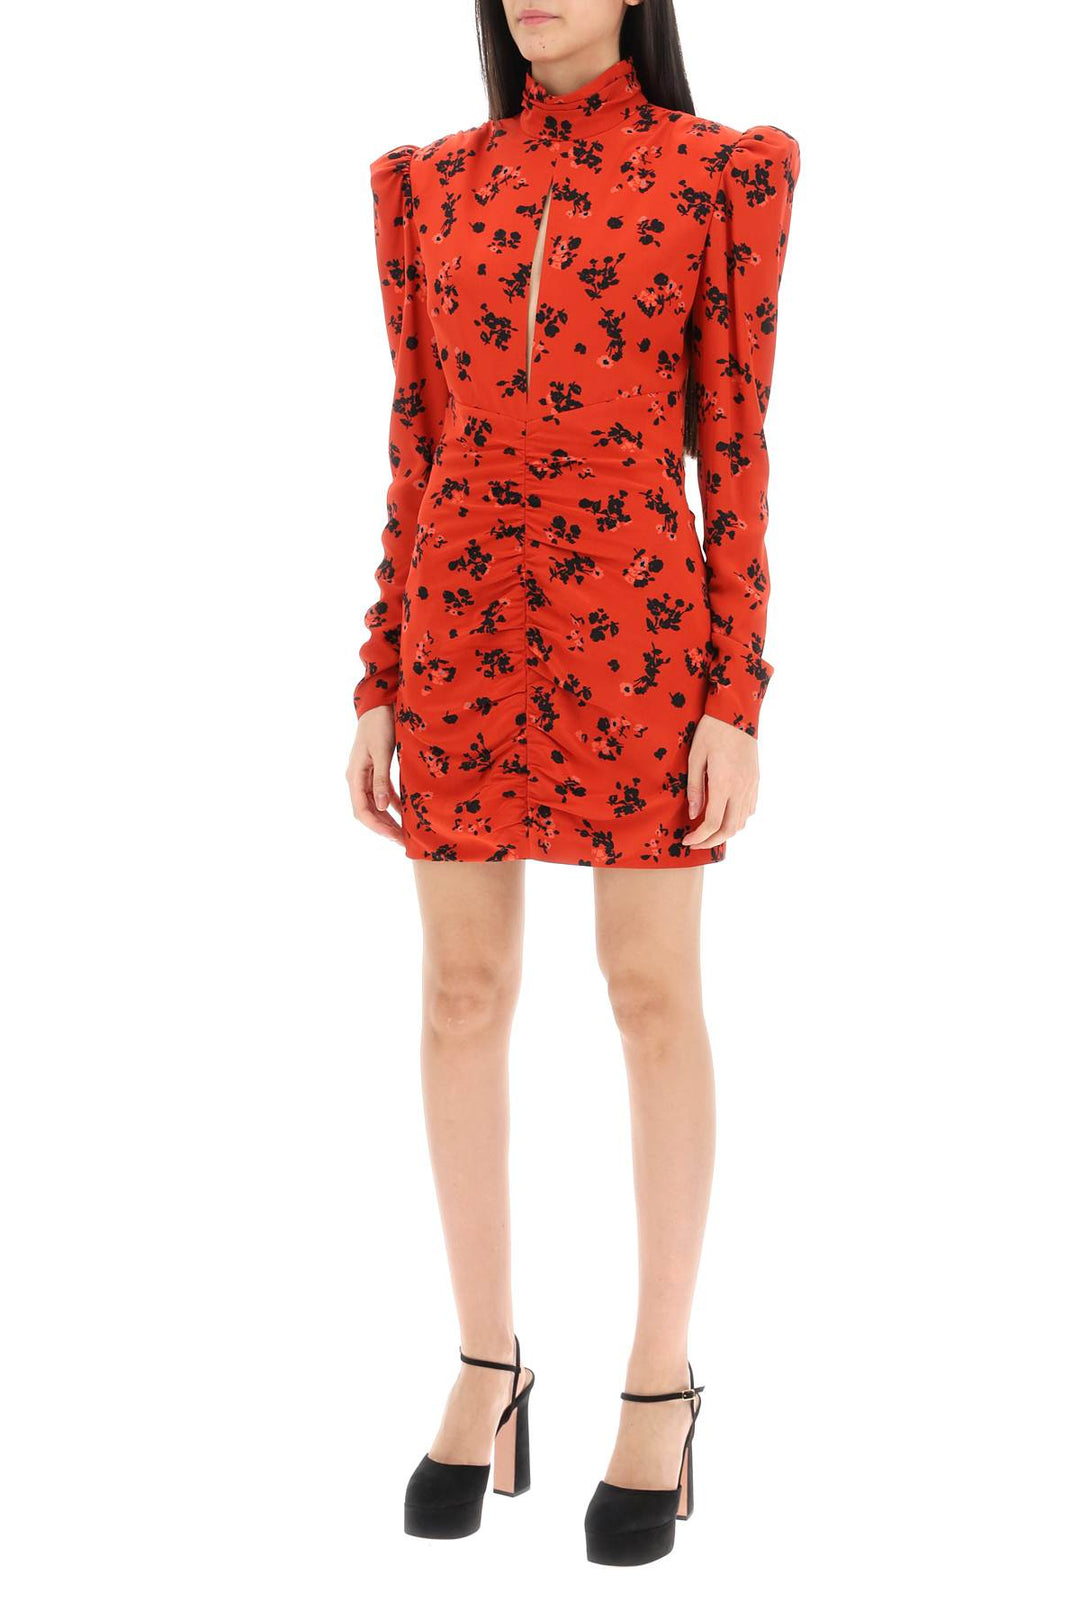 Alessandra Rich High Neck Floral Mini Dress   Rosso